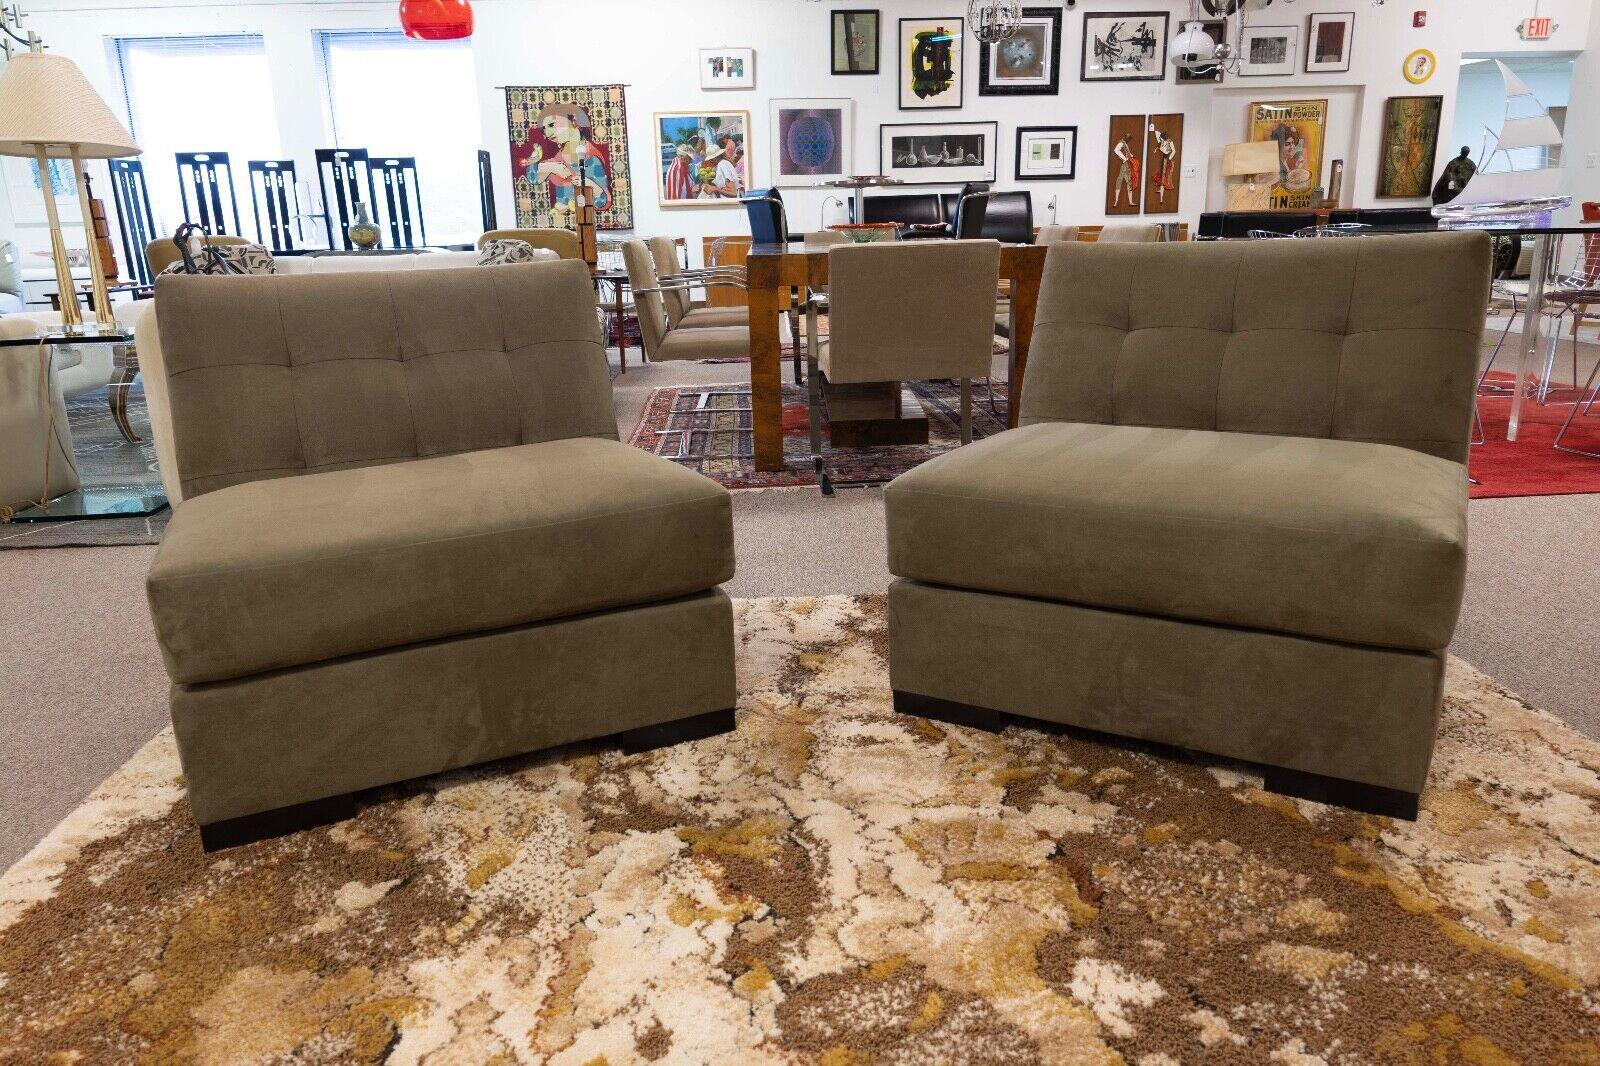 Interior Craft Pair of Suede Taupe Chairs Contemporary Modern In Good Condition For Sale In Keego Harbor, MI